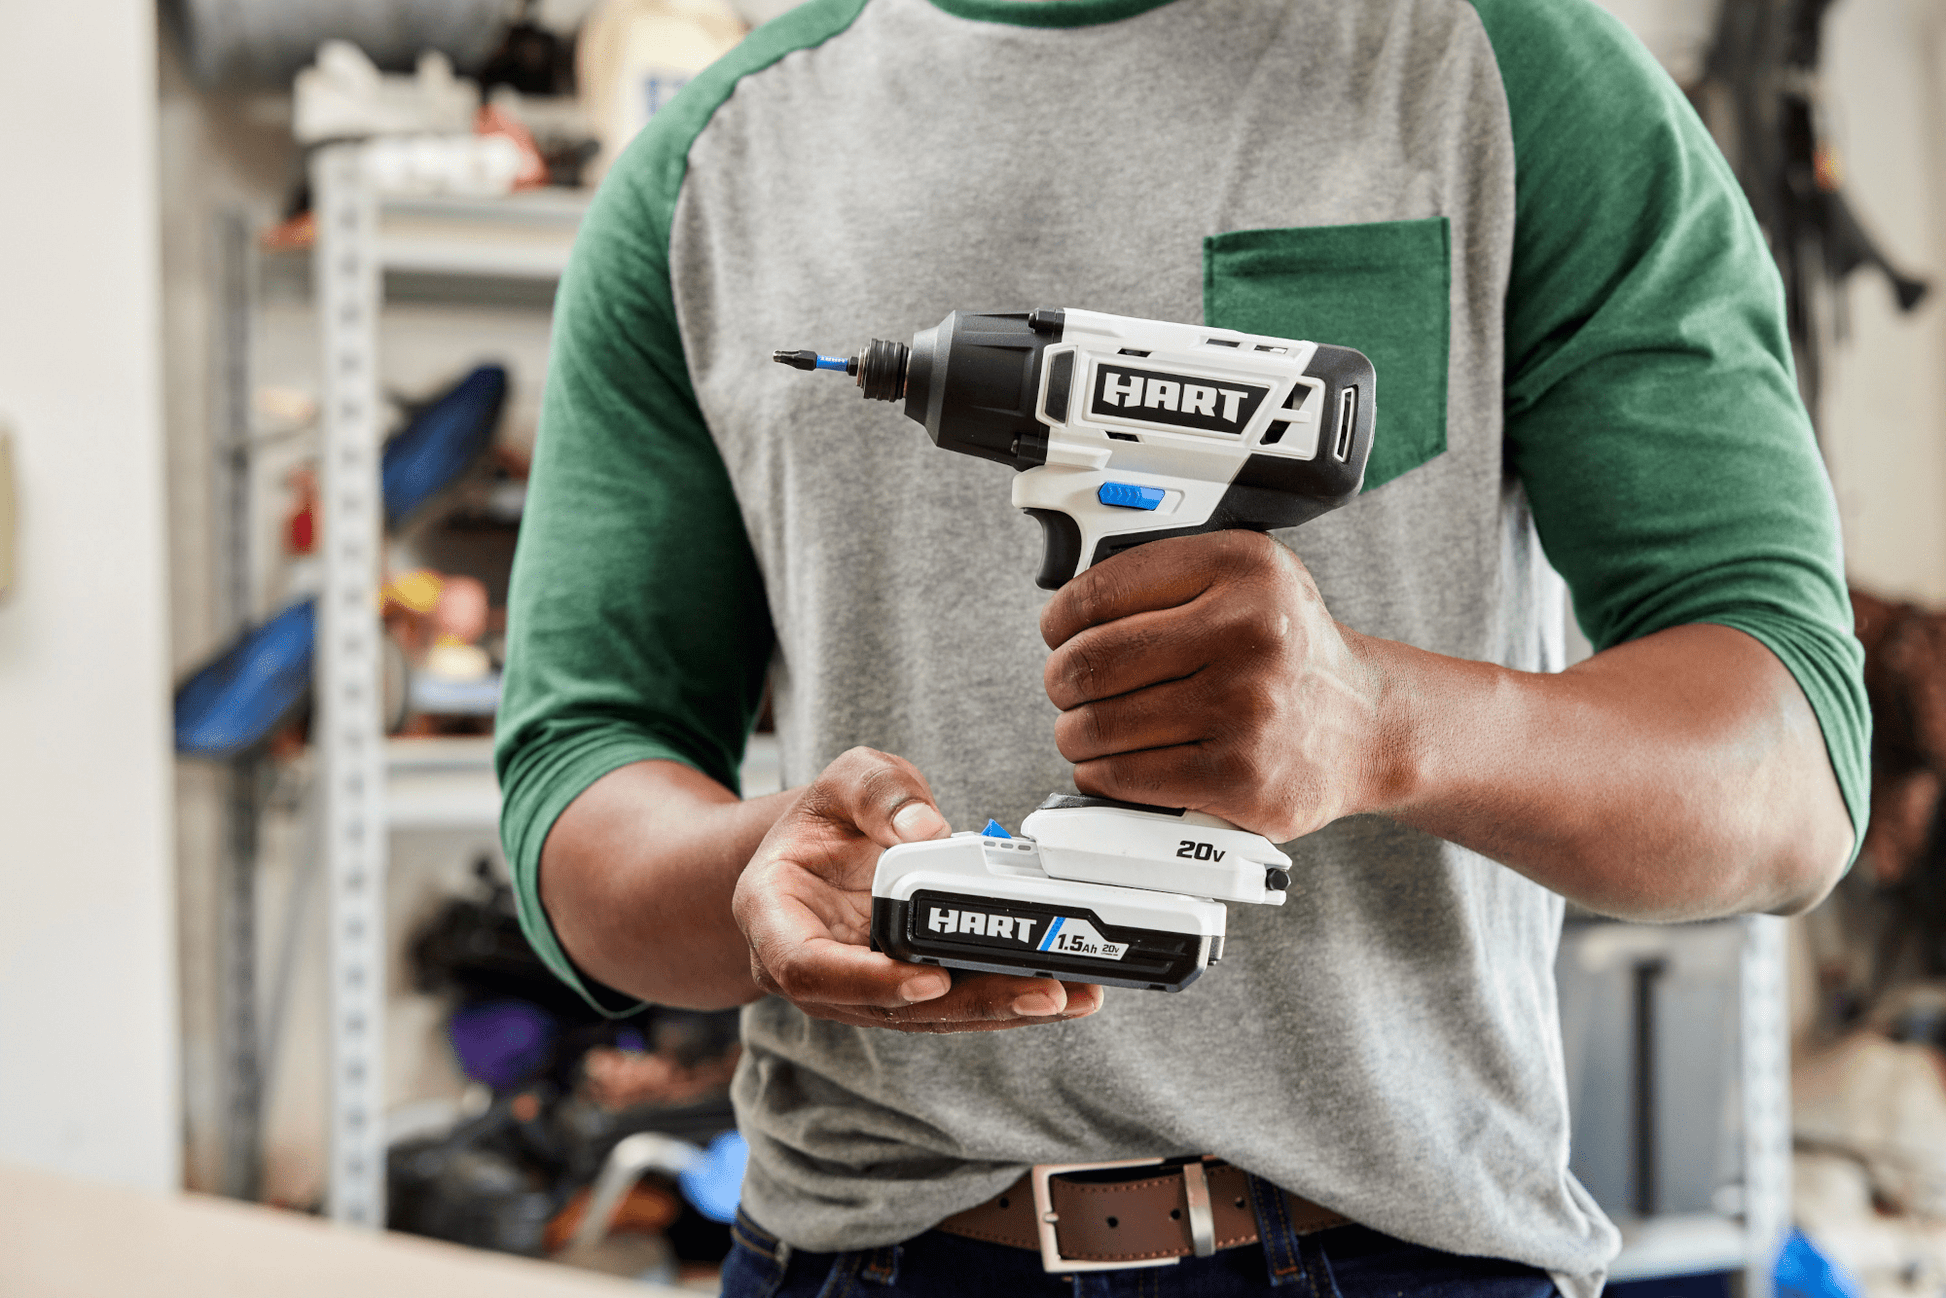 20V 1/4" Cordless Impact Driver (Battery and Charger Not Included)